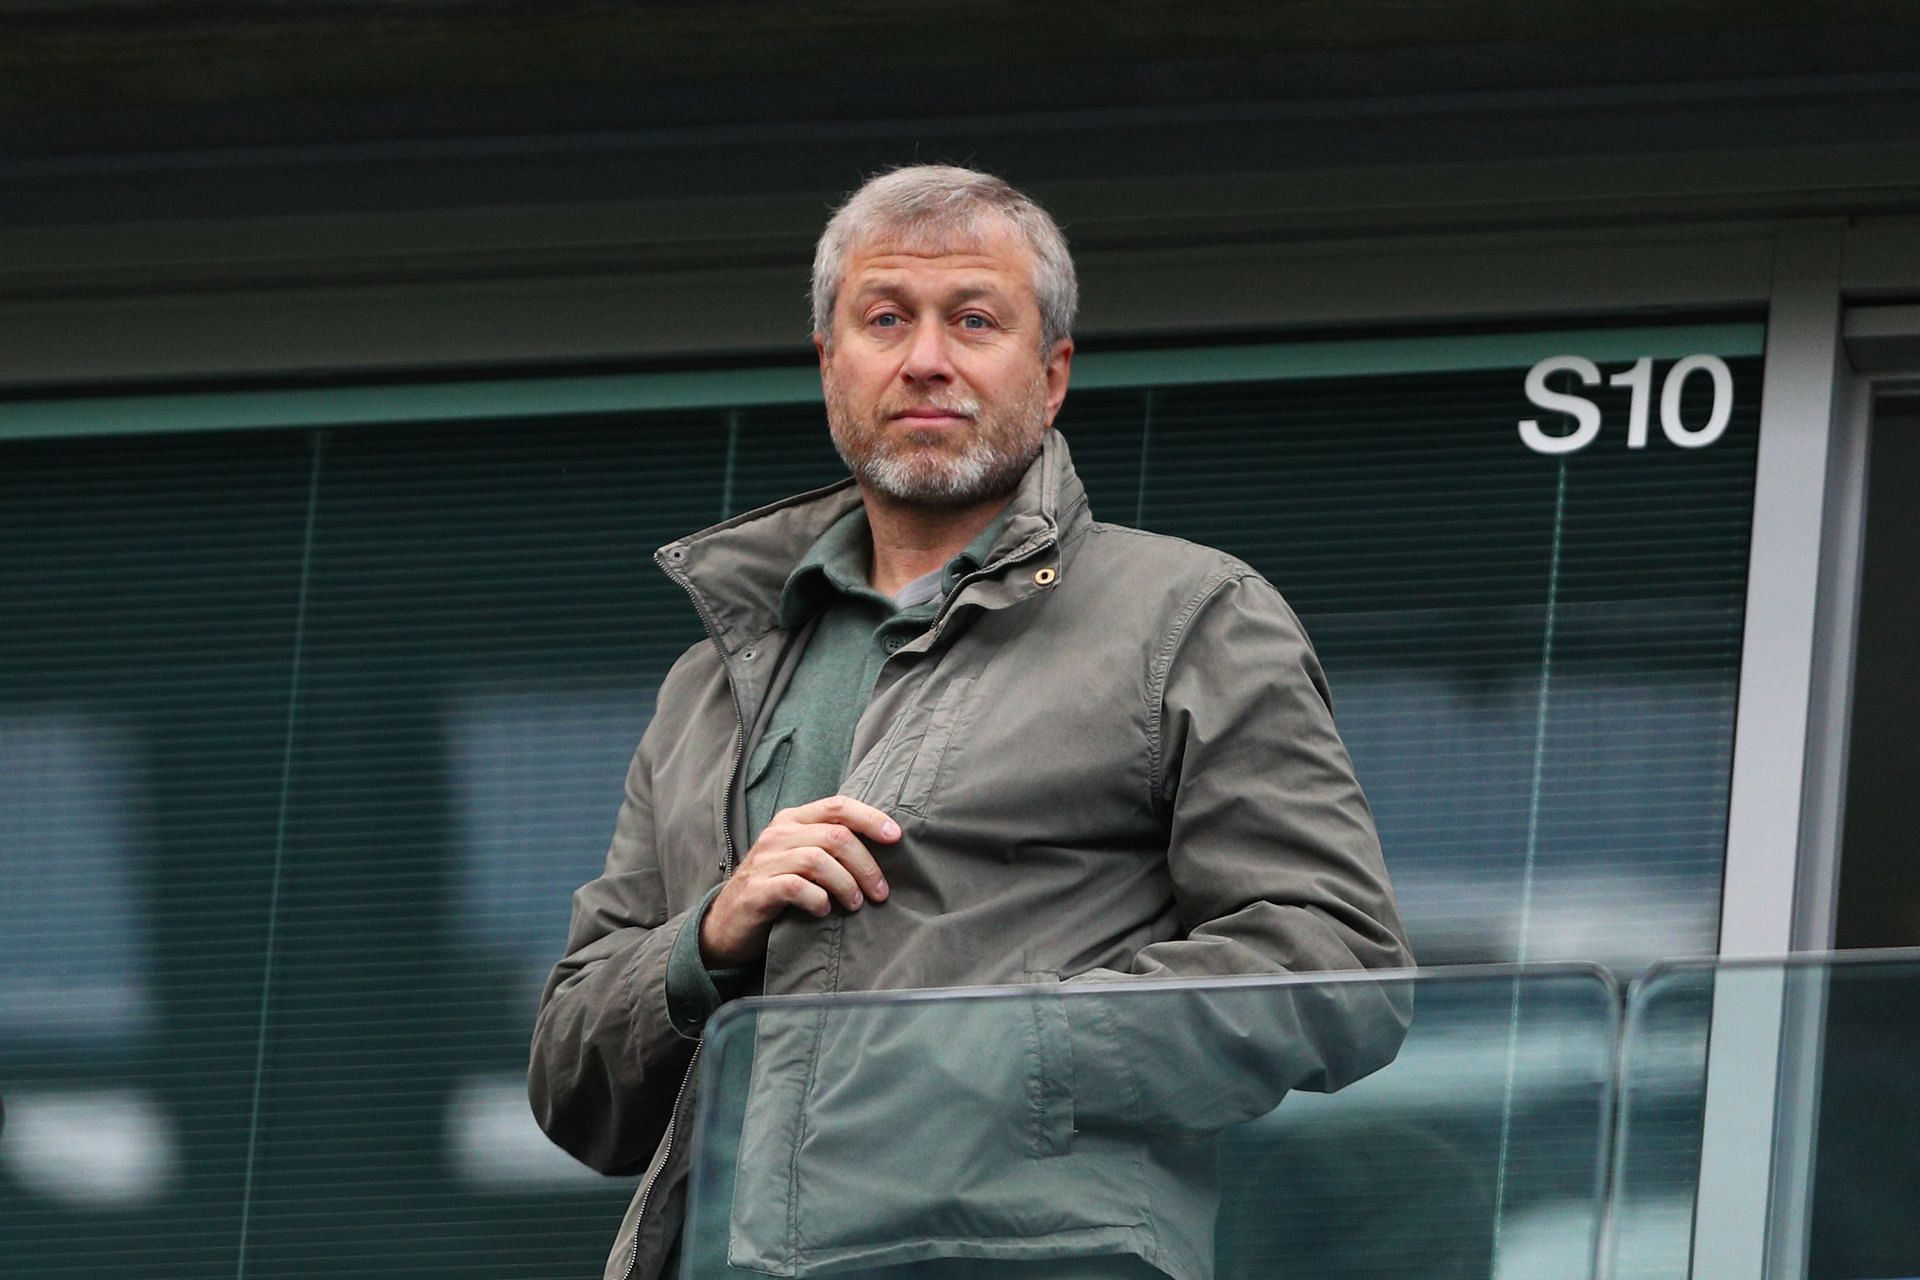 Roman Abramovich has decided to part ways with his club after almost two decades